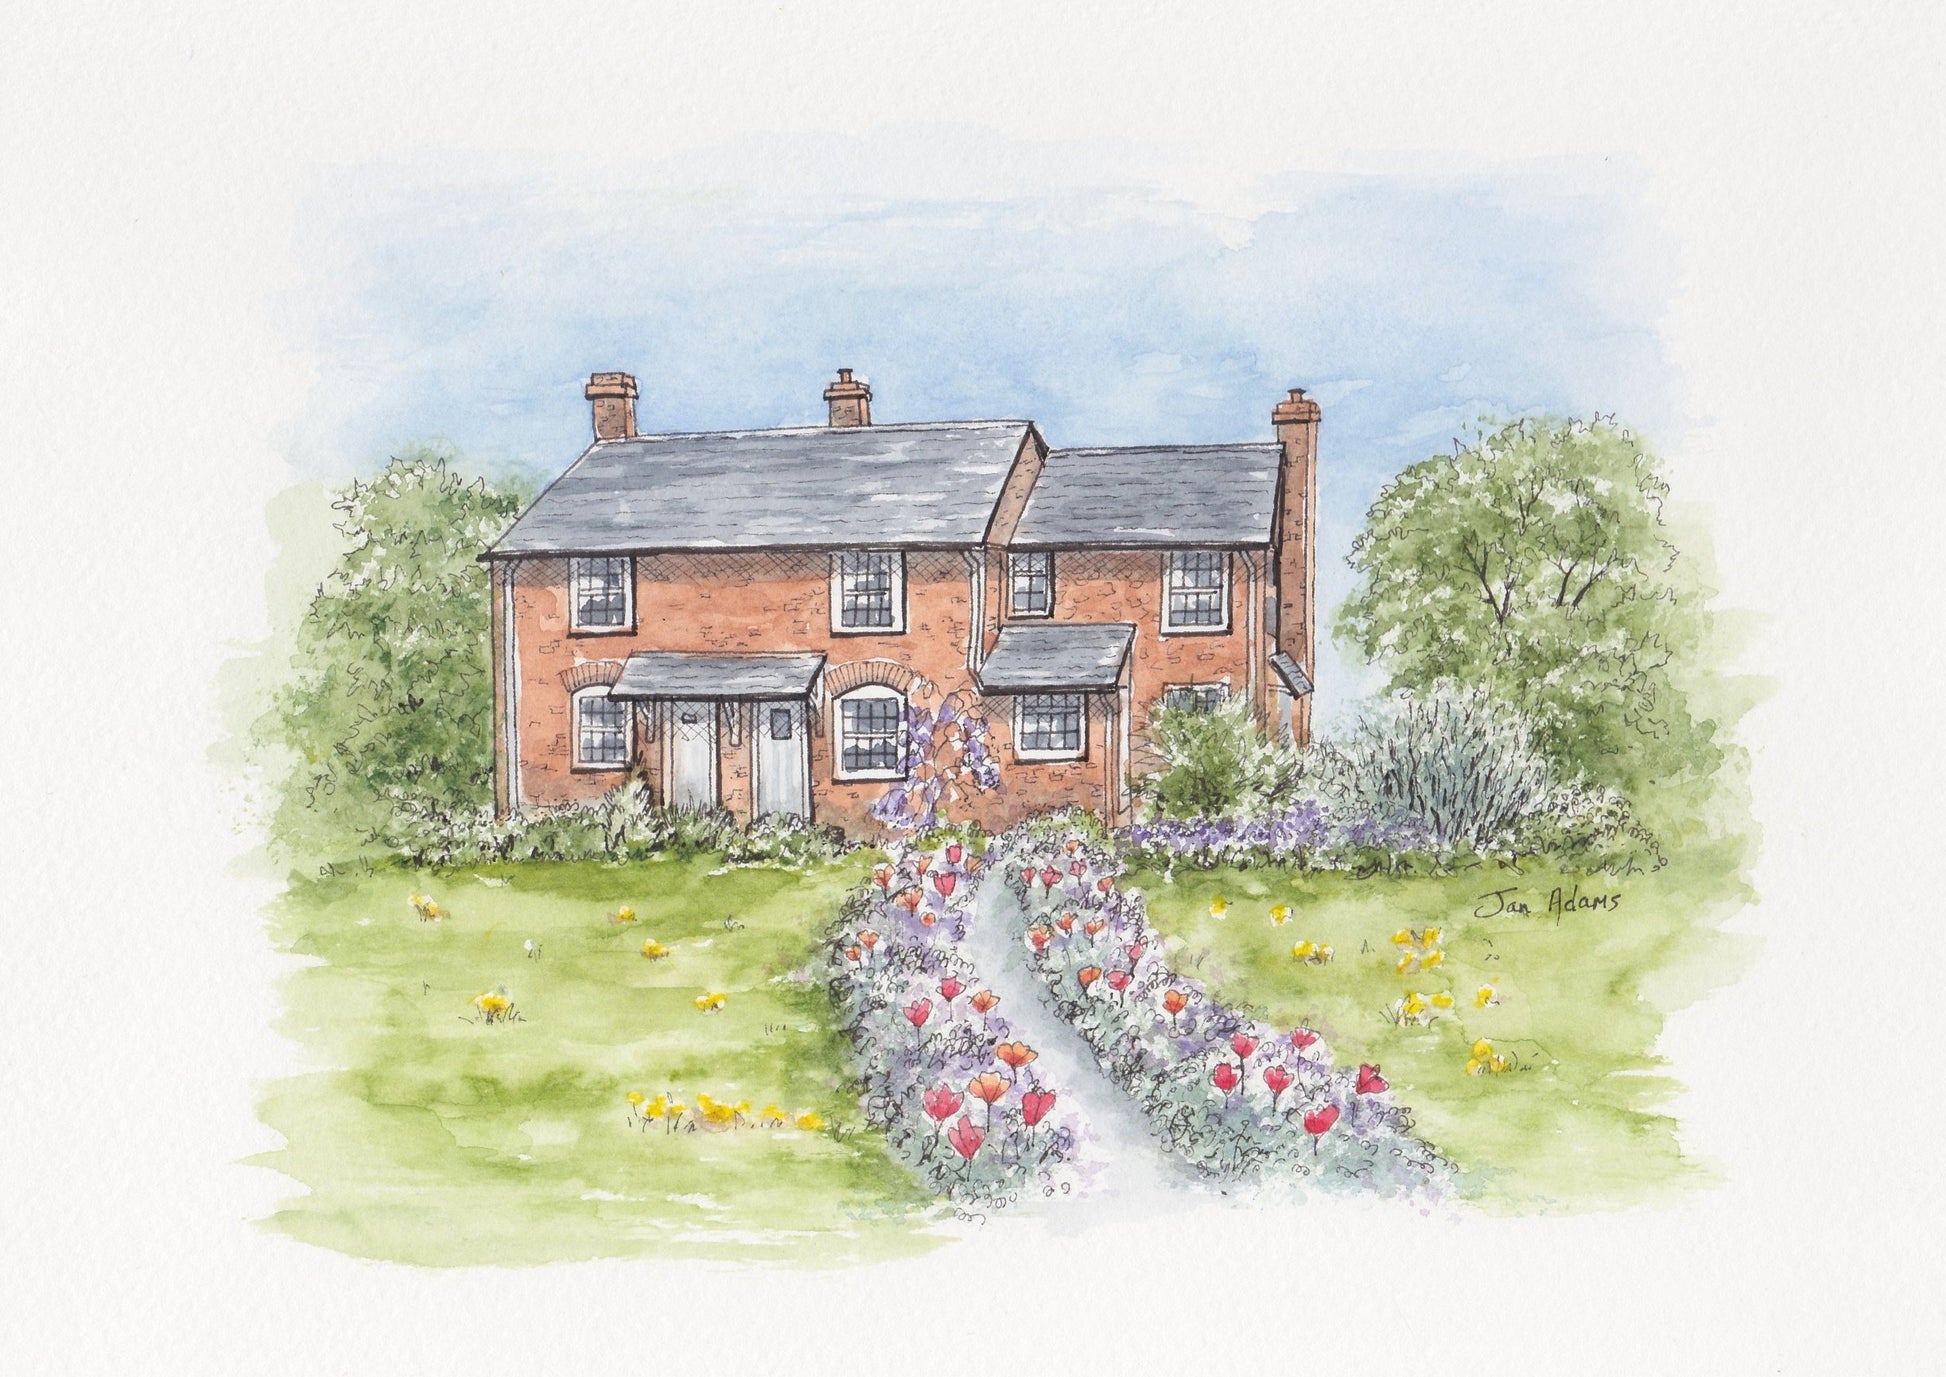 Detached red brick house with wildflower edging to path